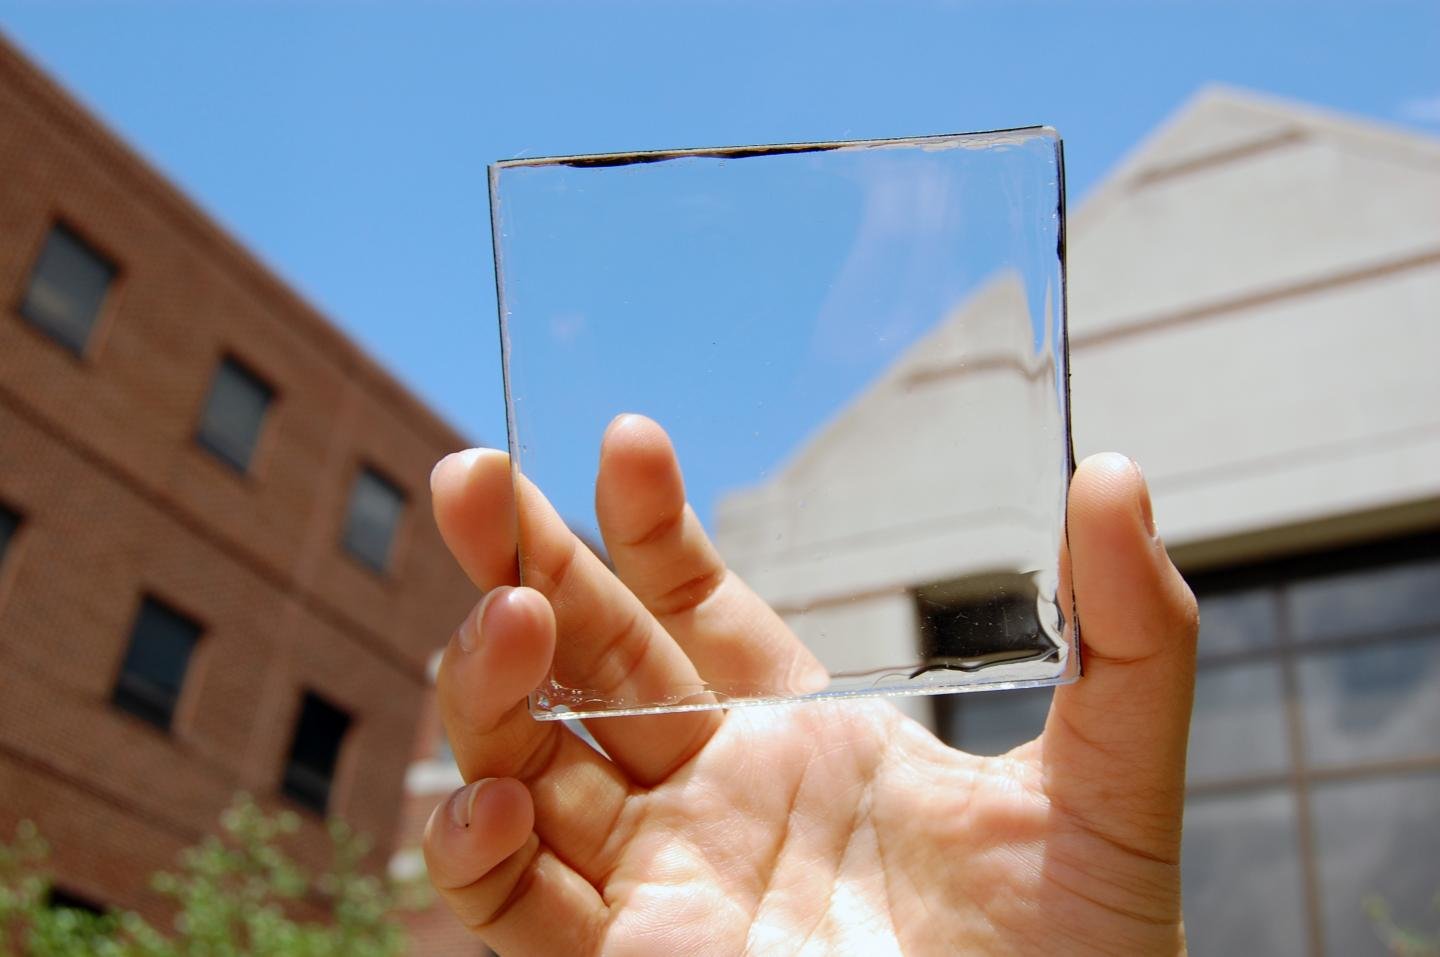 Transparent solar technology represents 'wave of the future